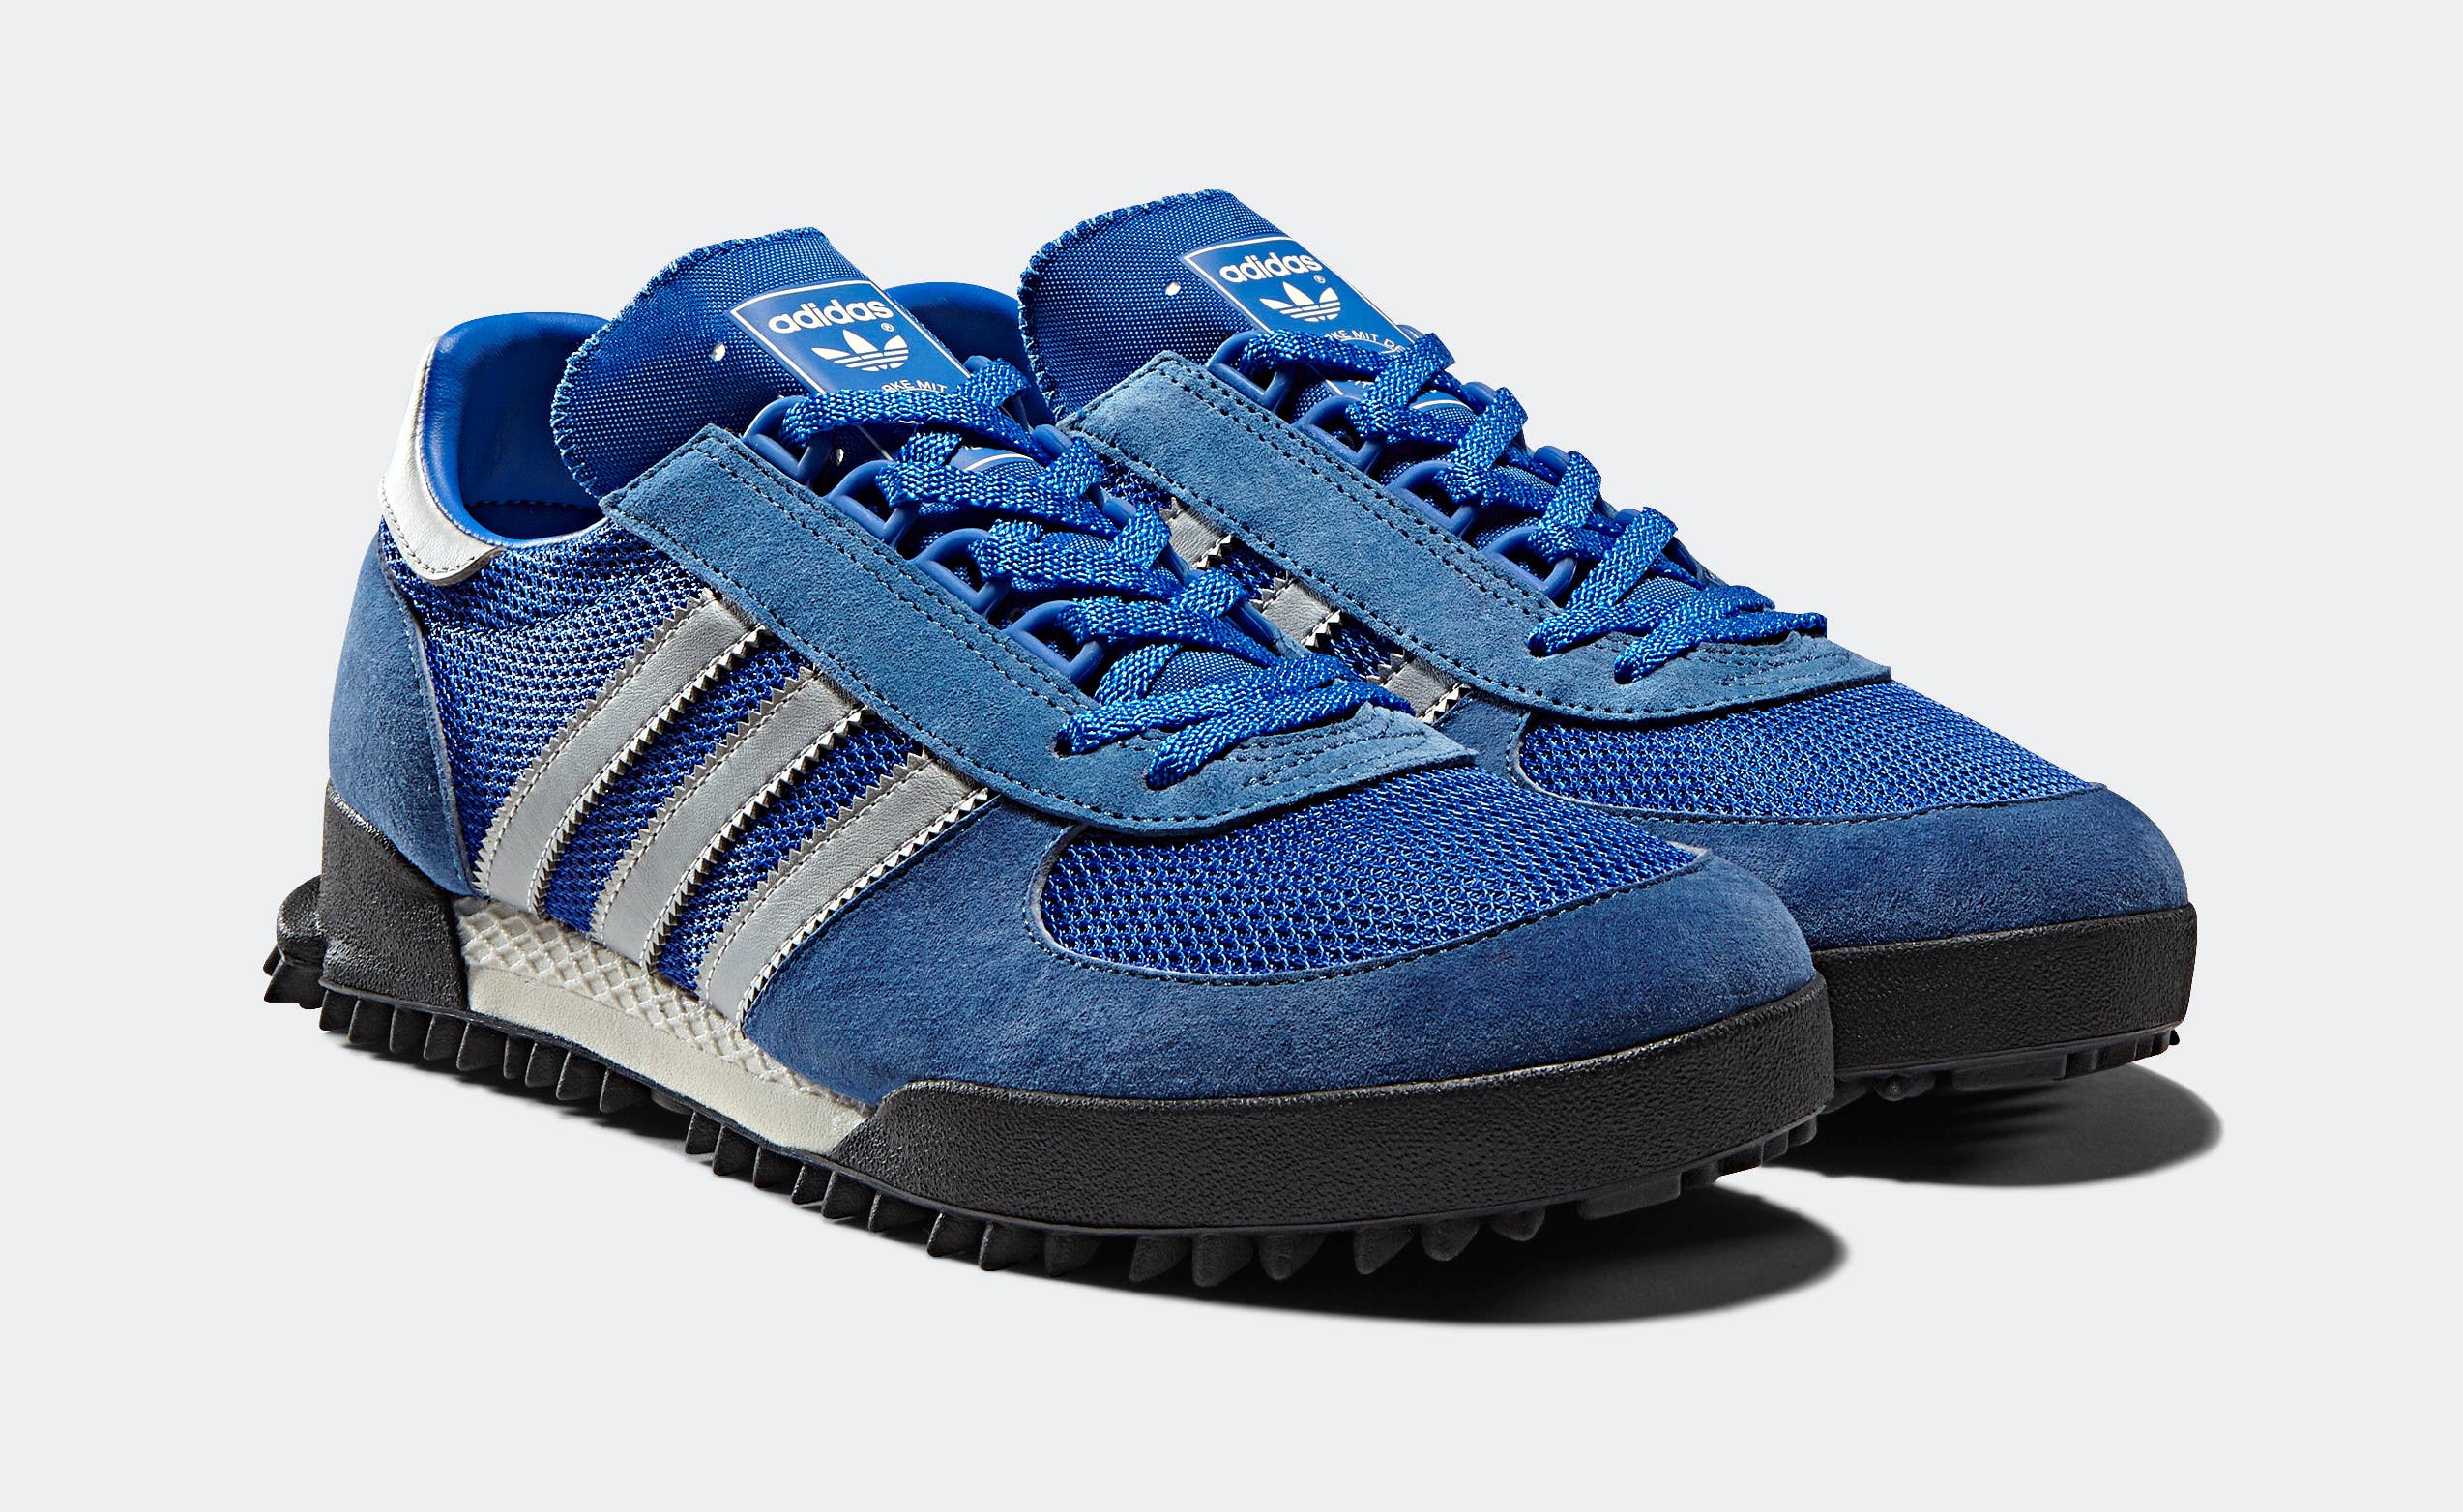 Classic Kick Year | Off the a is Complex New Adidas Bringing Back to